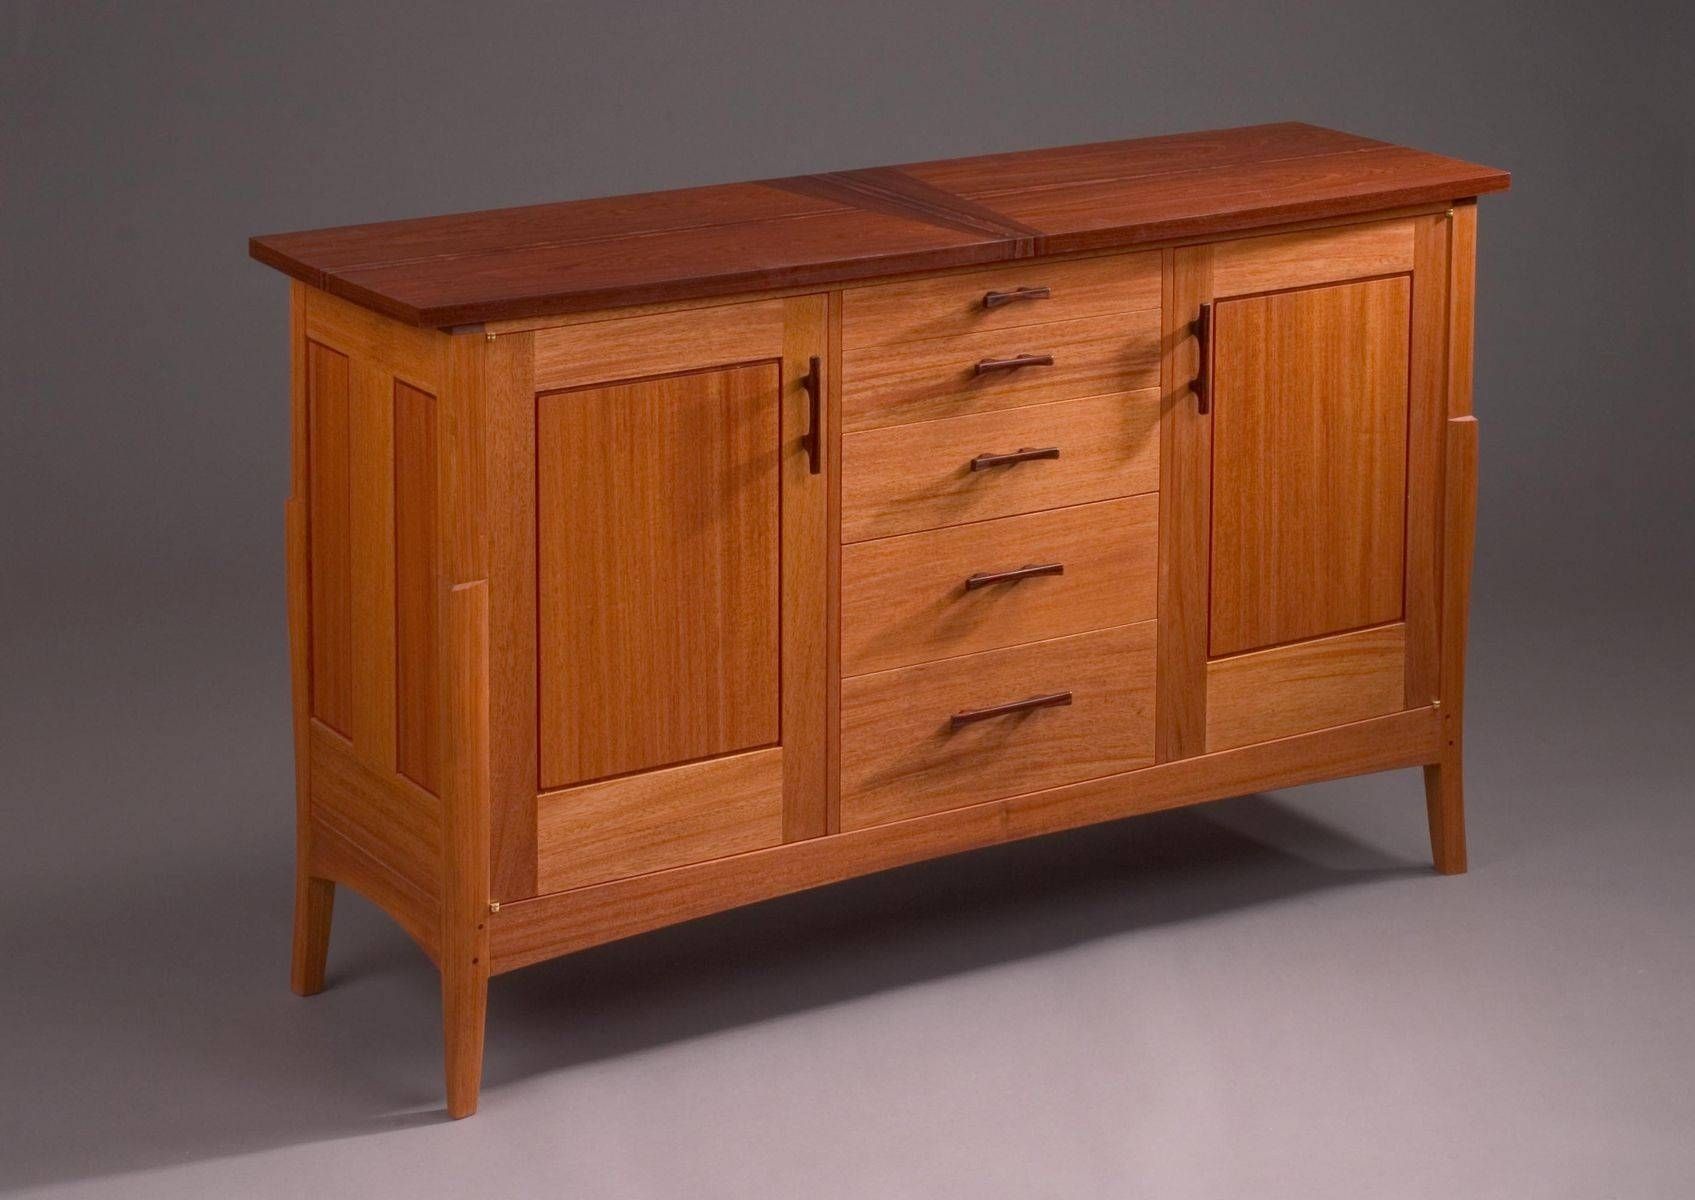 Hand Crafted Mahogany Musician's Sideboardpat Megowan Designer Within Mission Style Sideboards (View 15 of 15)